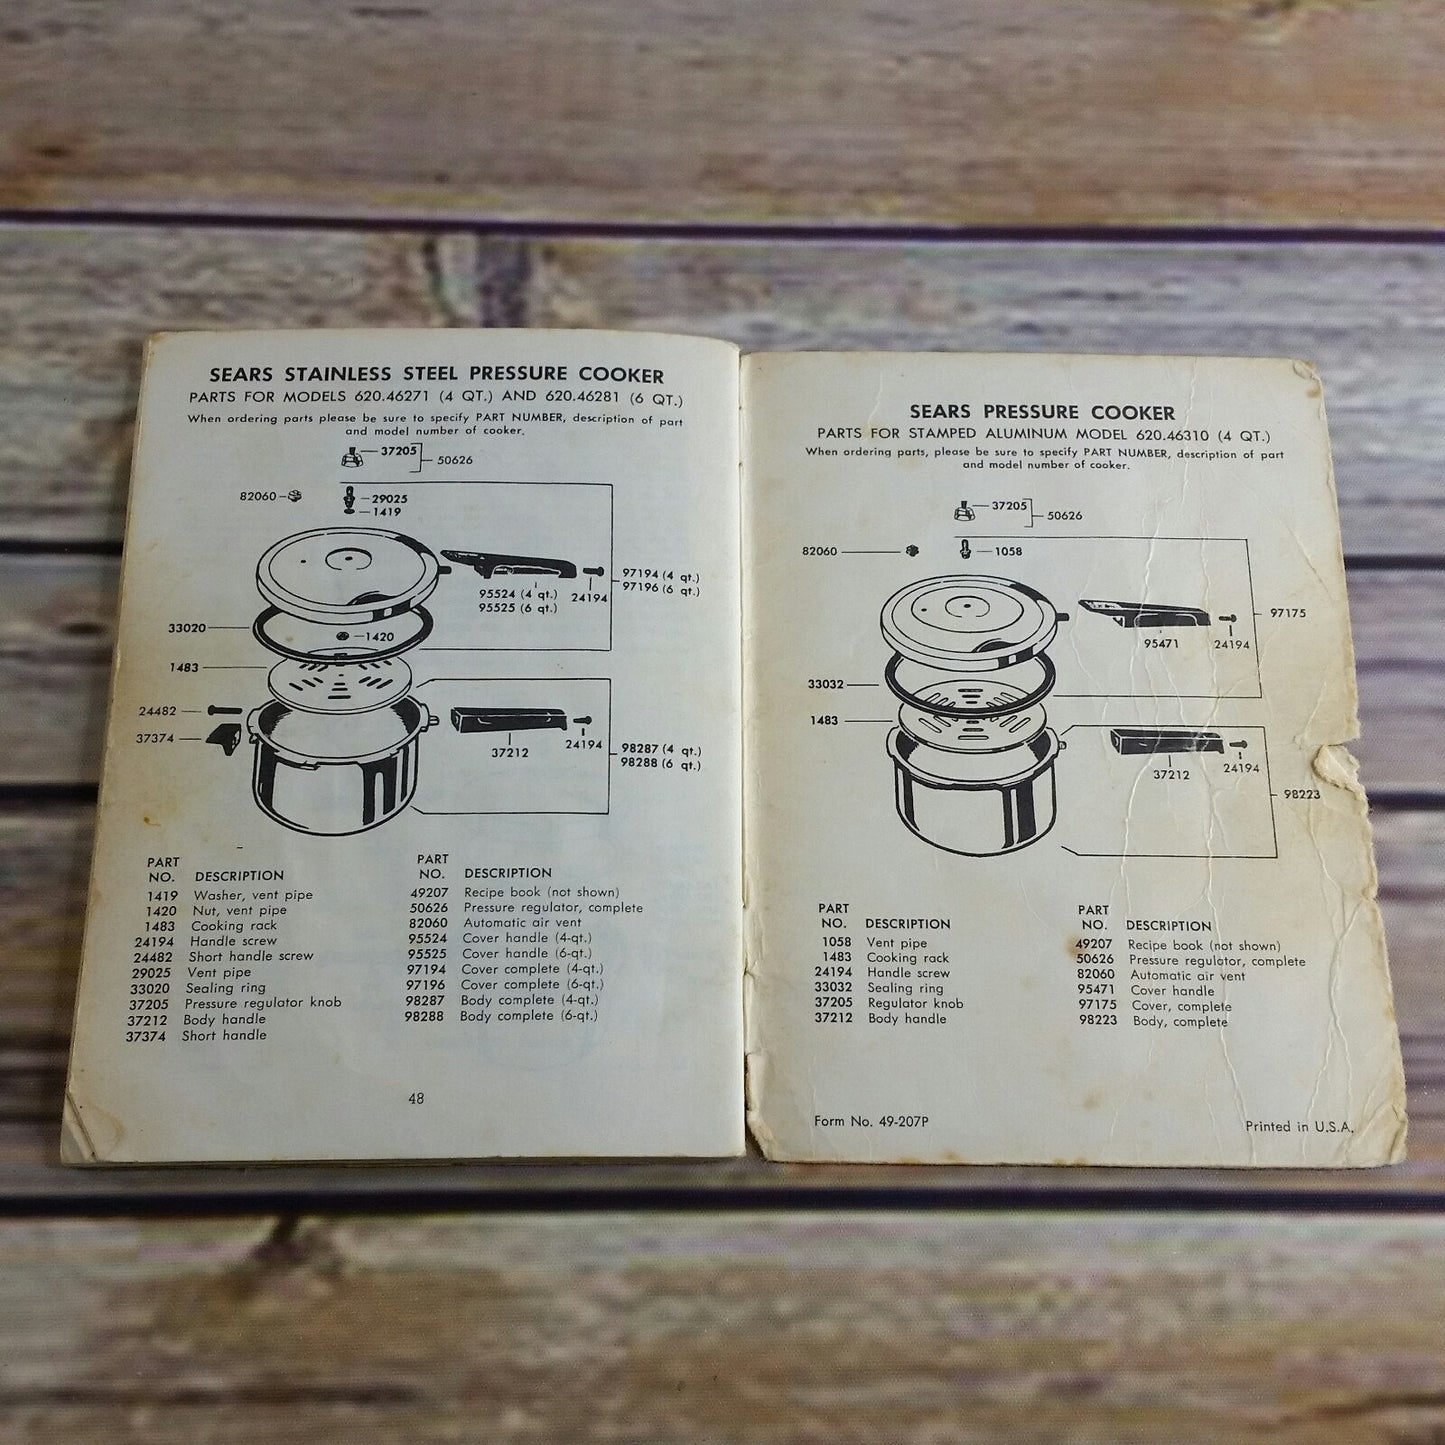 Vintage Cookbook Sears Pressure Cooker Recipes and Instructions 1971 1970s Booklet Recipe Book Time Tables